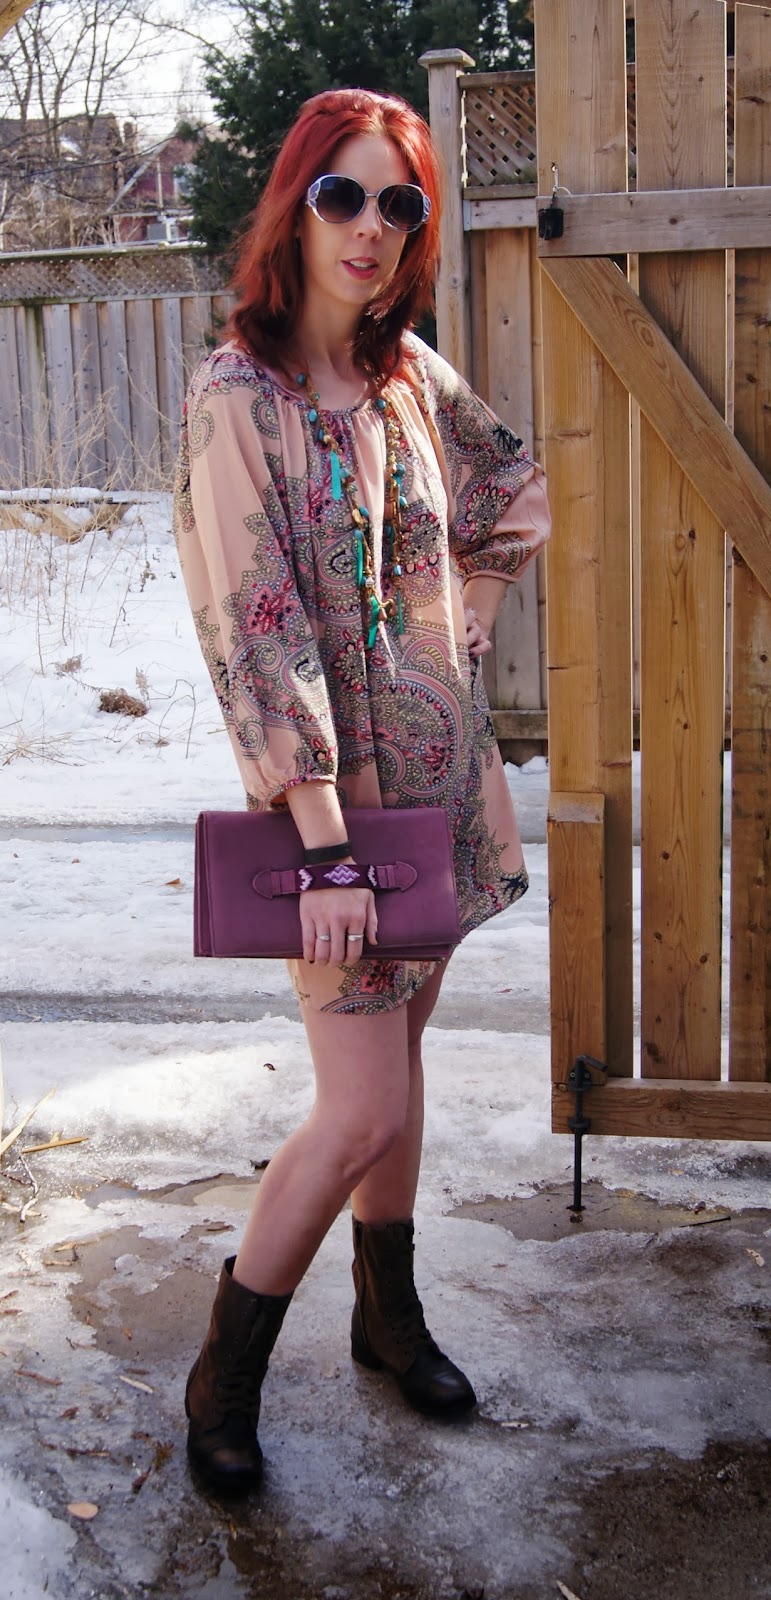 Hippie Chic!: Forever 21 Dress, House of Harlow 1960 Clutch from Winners, Wanted Boots from Marshalls, Fifth Avenue Necklace, fashion, style, blogger Melanie.Ps The Purple Scarf Toronto